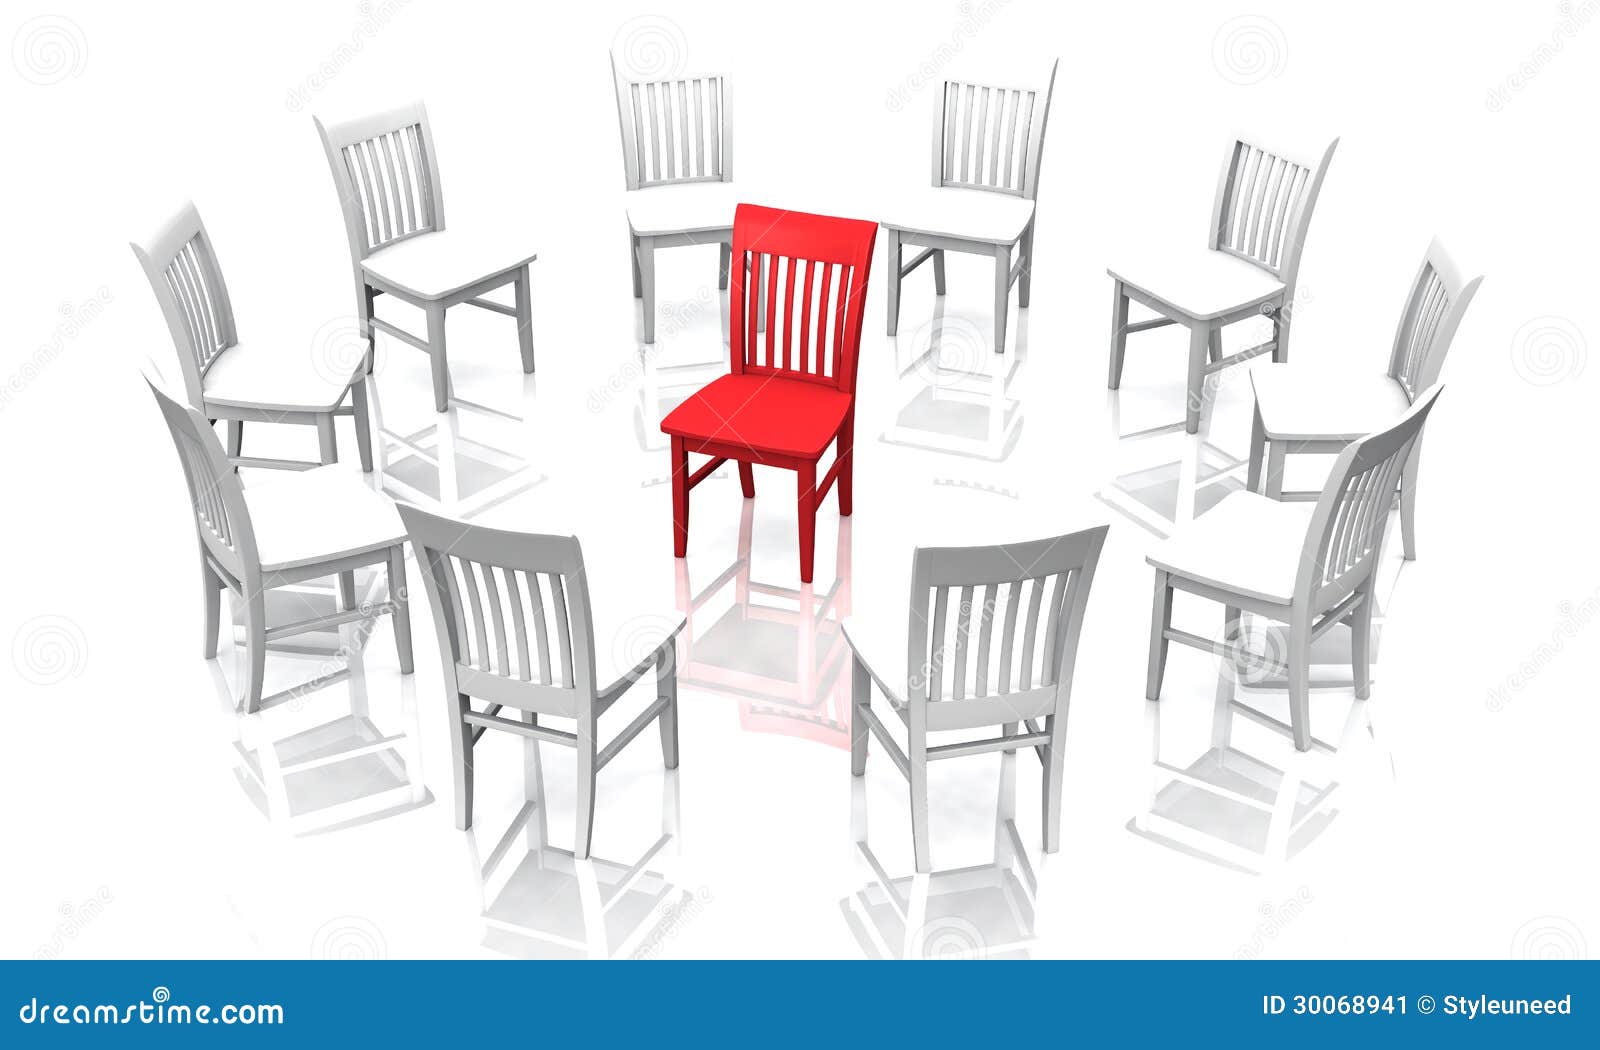 Circle Of Chairs With Red One In The Middle Stock Image - Image: 30068941